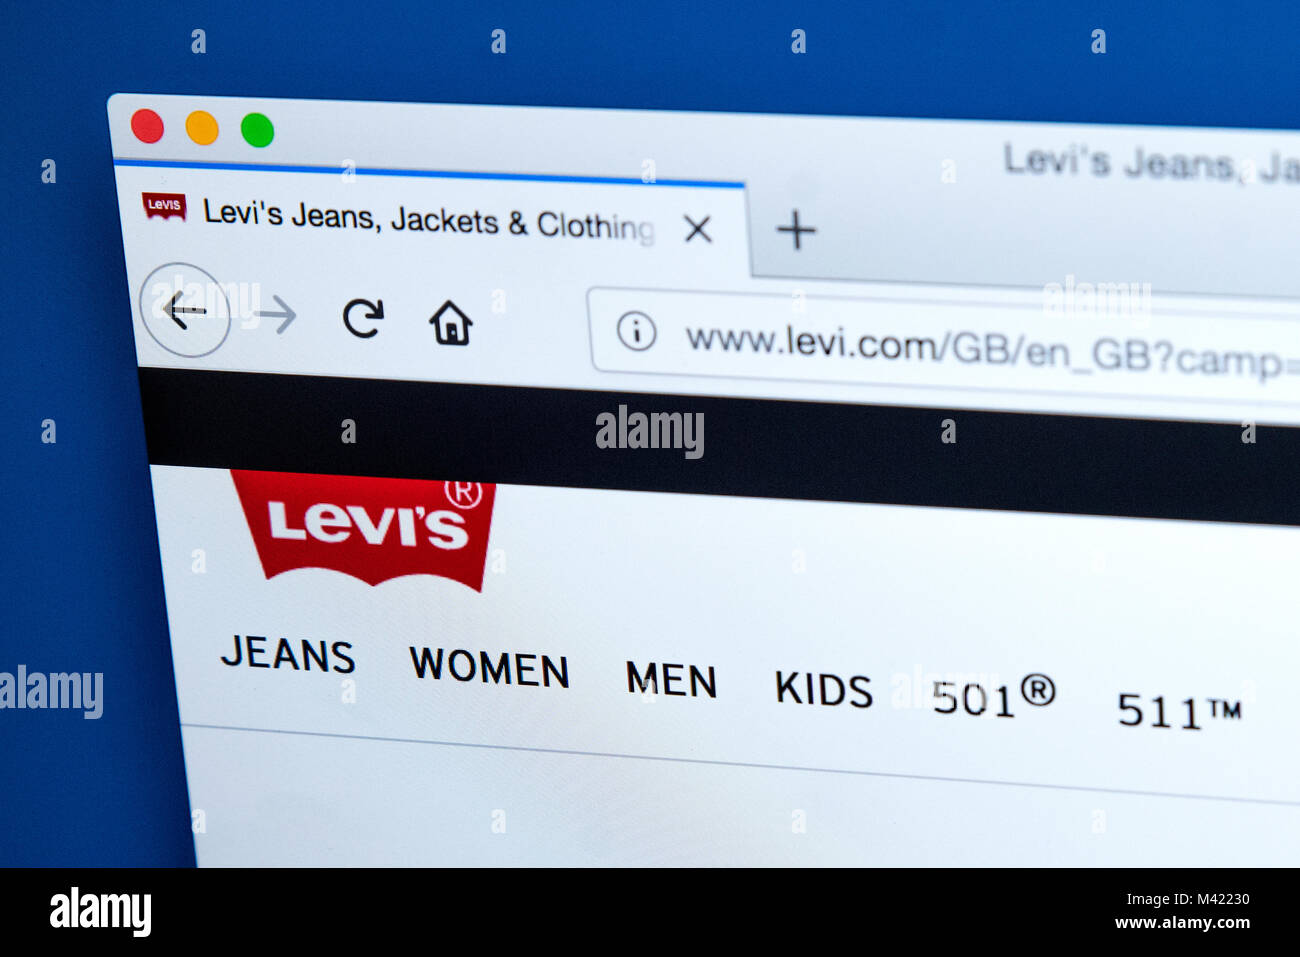 Levi Jeans Home High Resolution Stock Photography and Images - Alamy